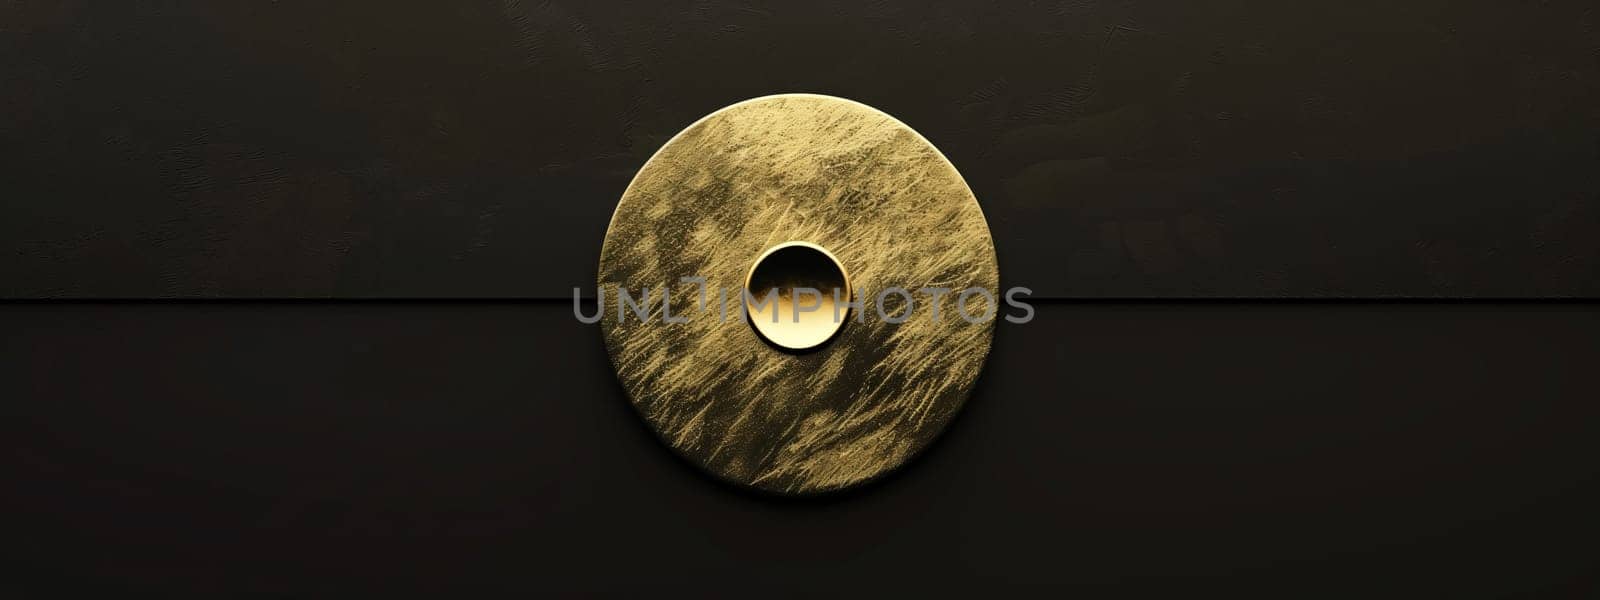 A bronze circle with a hole in the middle resembling a musical instrument on a black background. The metal and wood details in macro photography give it a fashionable art vibe in the darkness